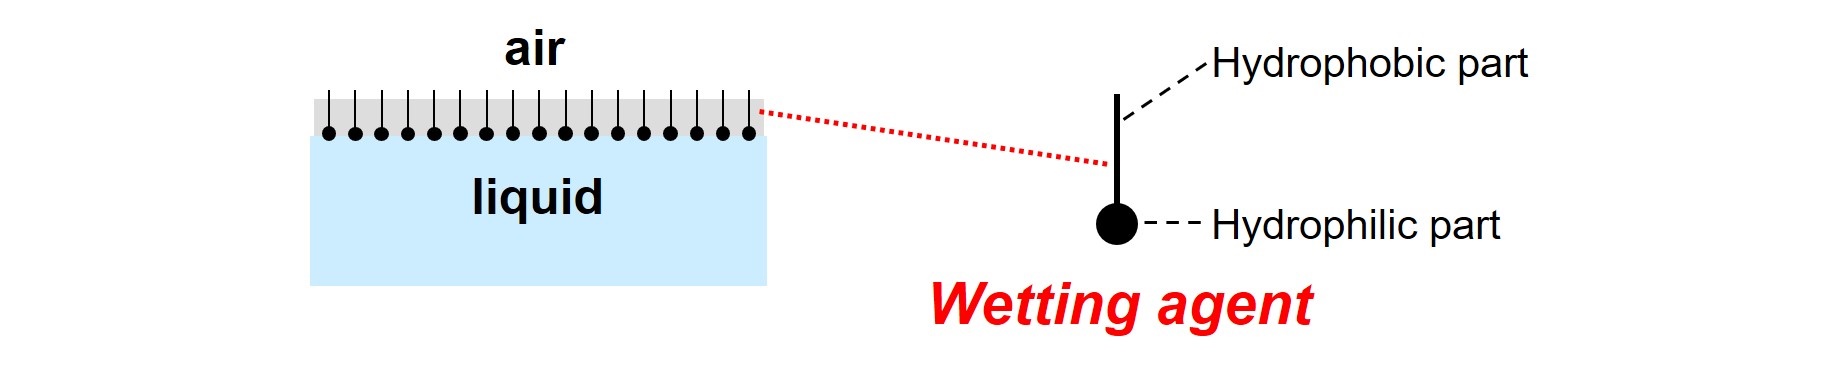 Wetting agent molecules adsorb and orient at a liquid-air interface.